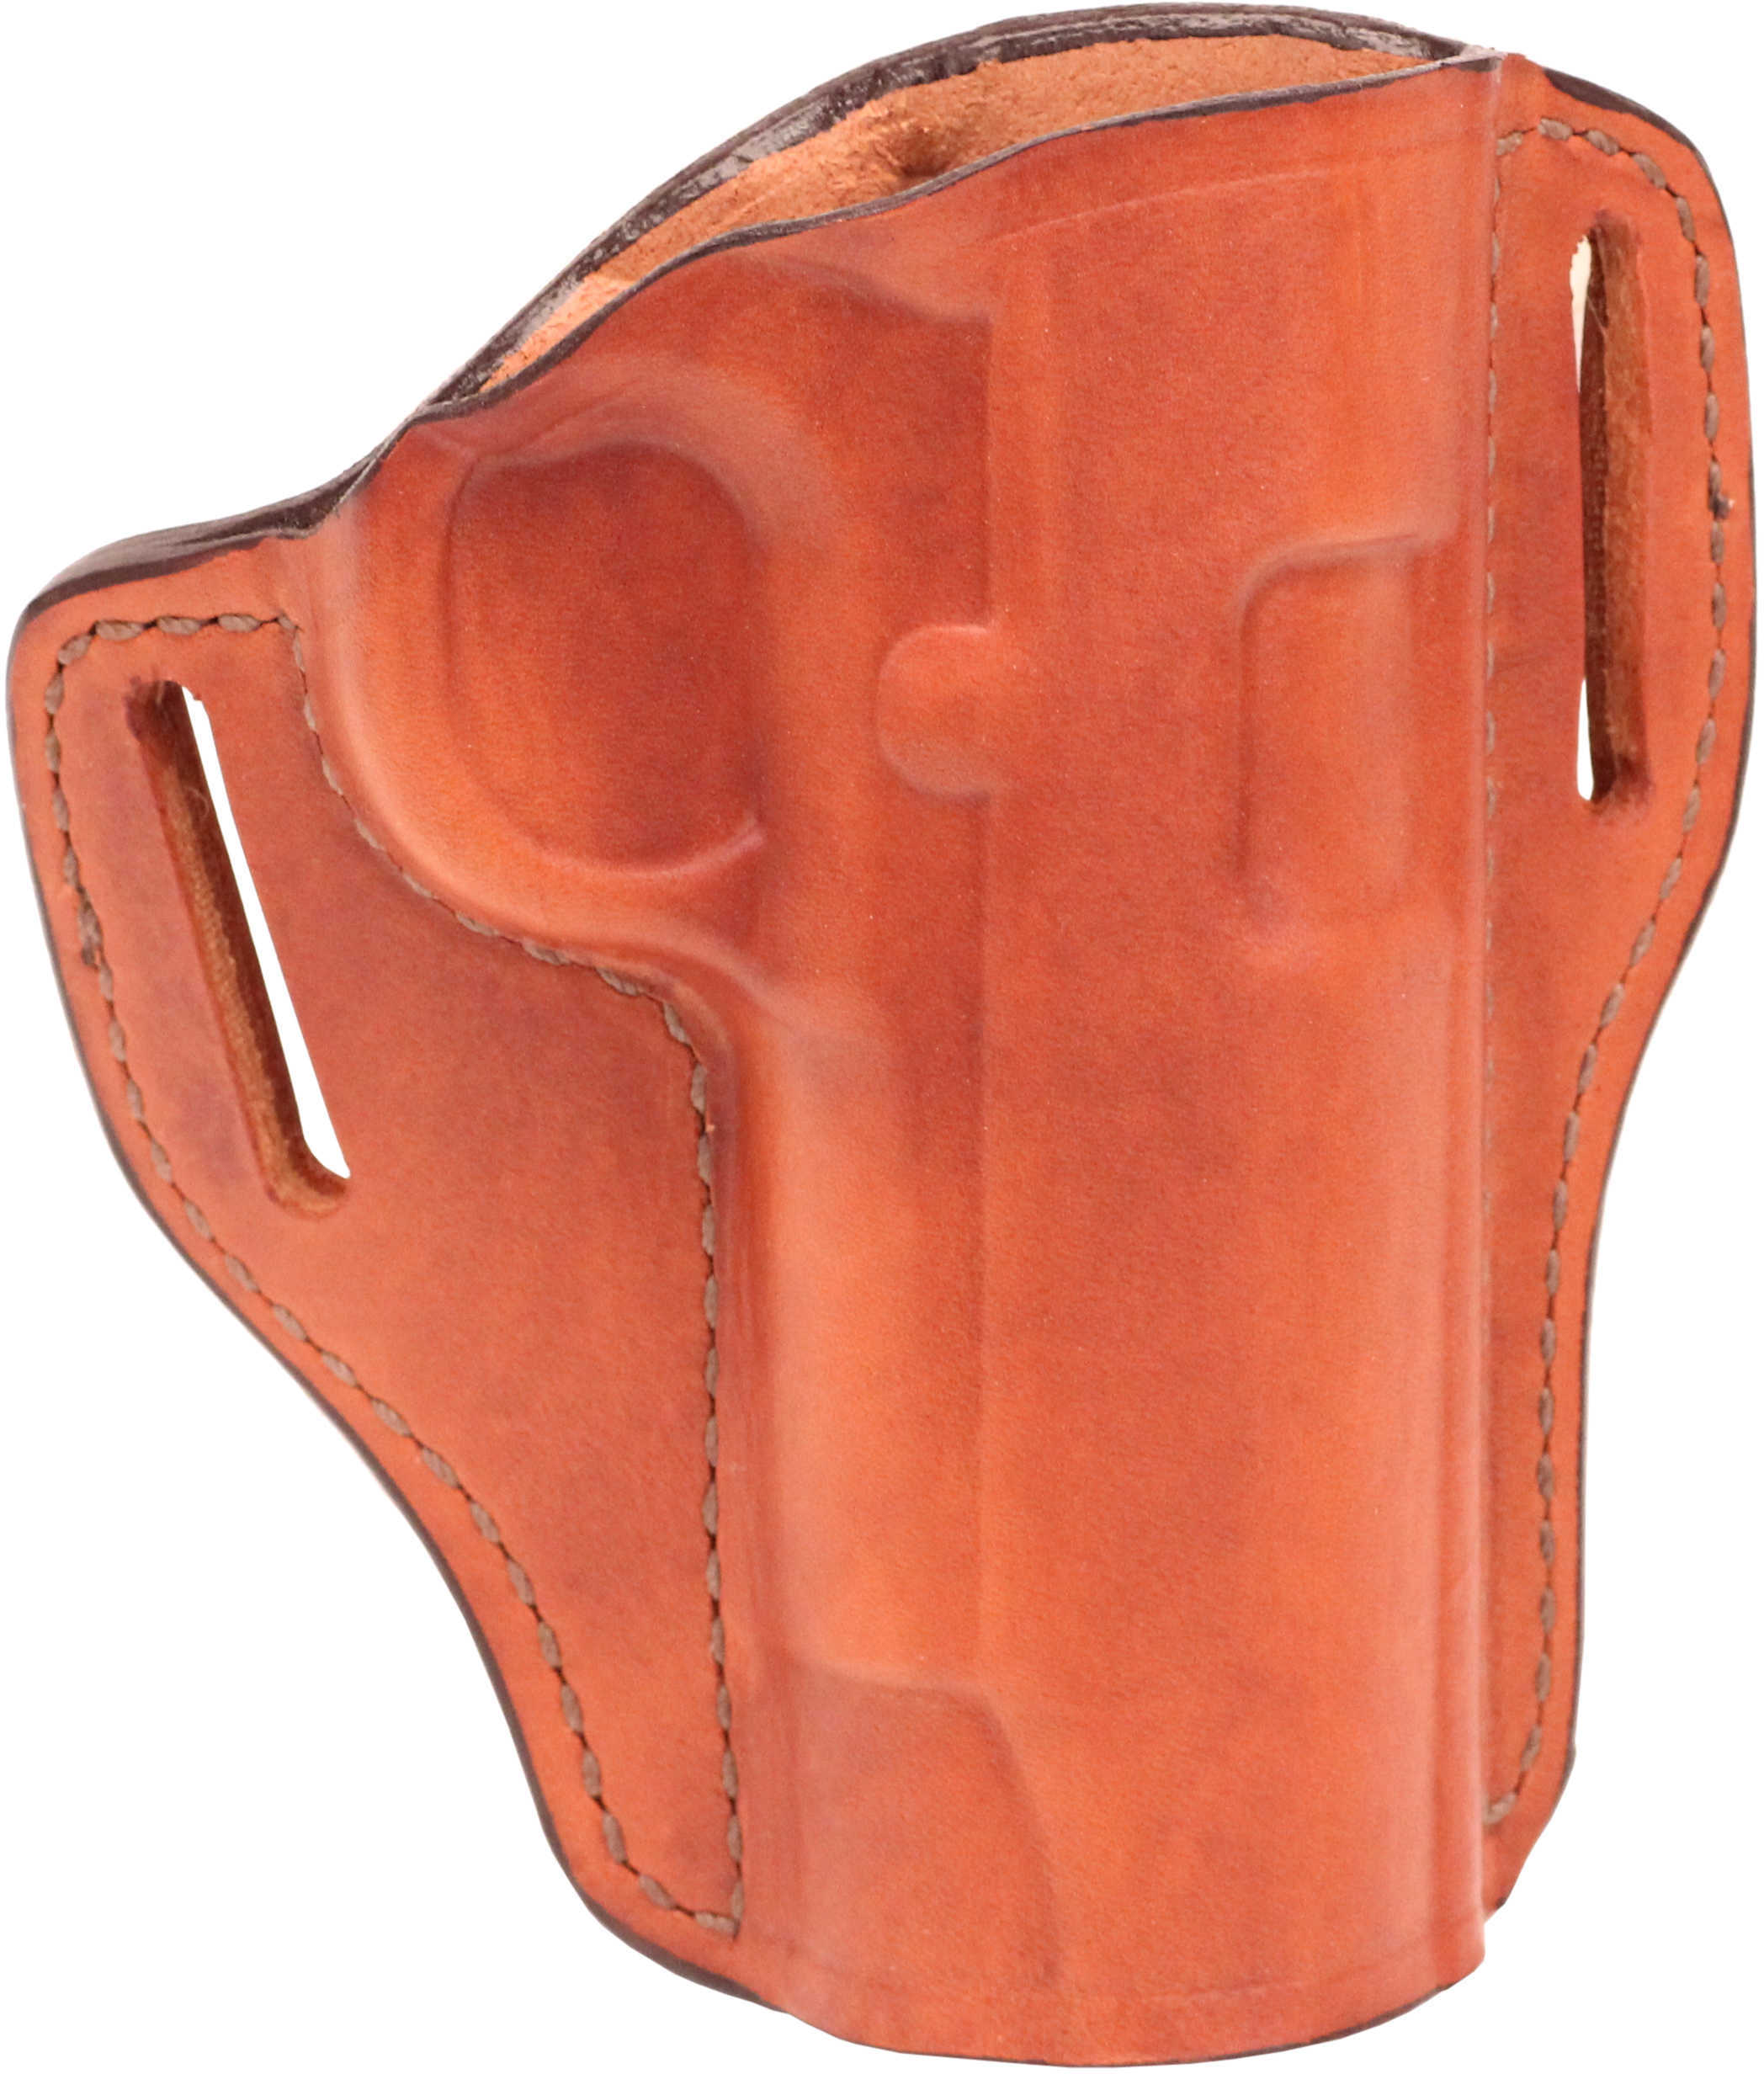 Bianchi 57 Remedy Holster Tan Right Hand 1911 Comm 23940